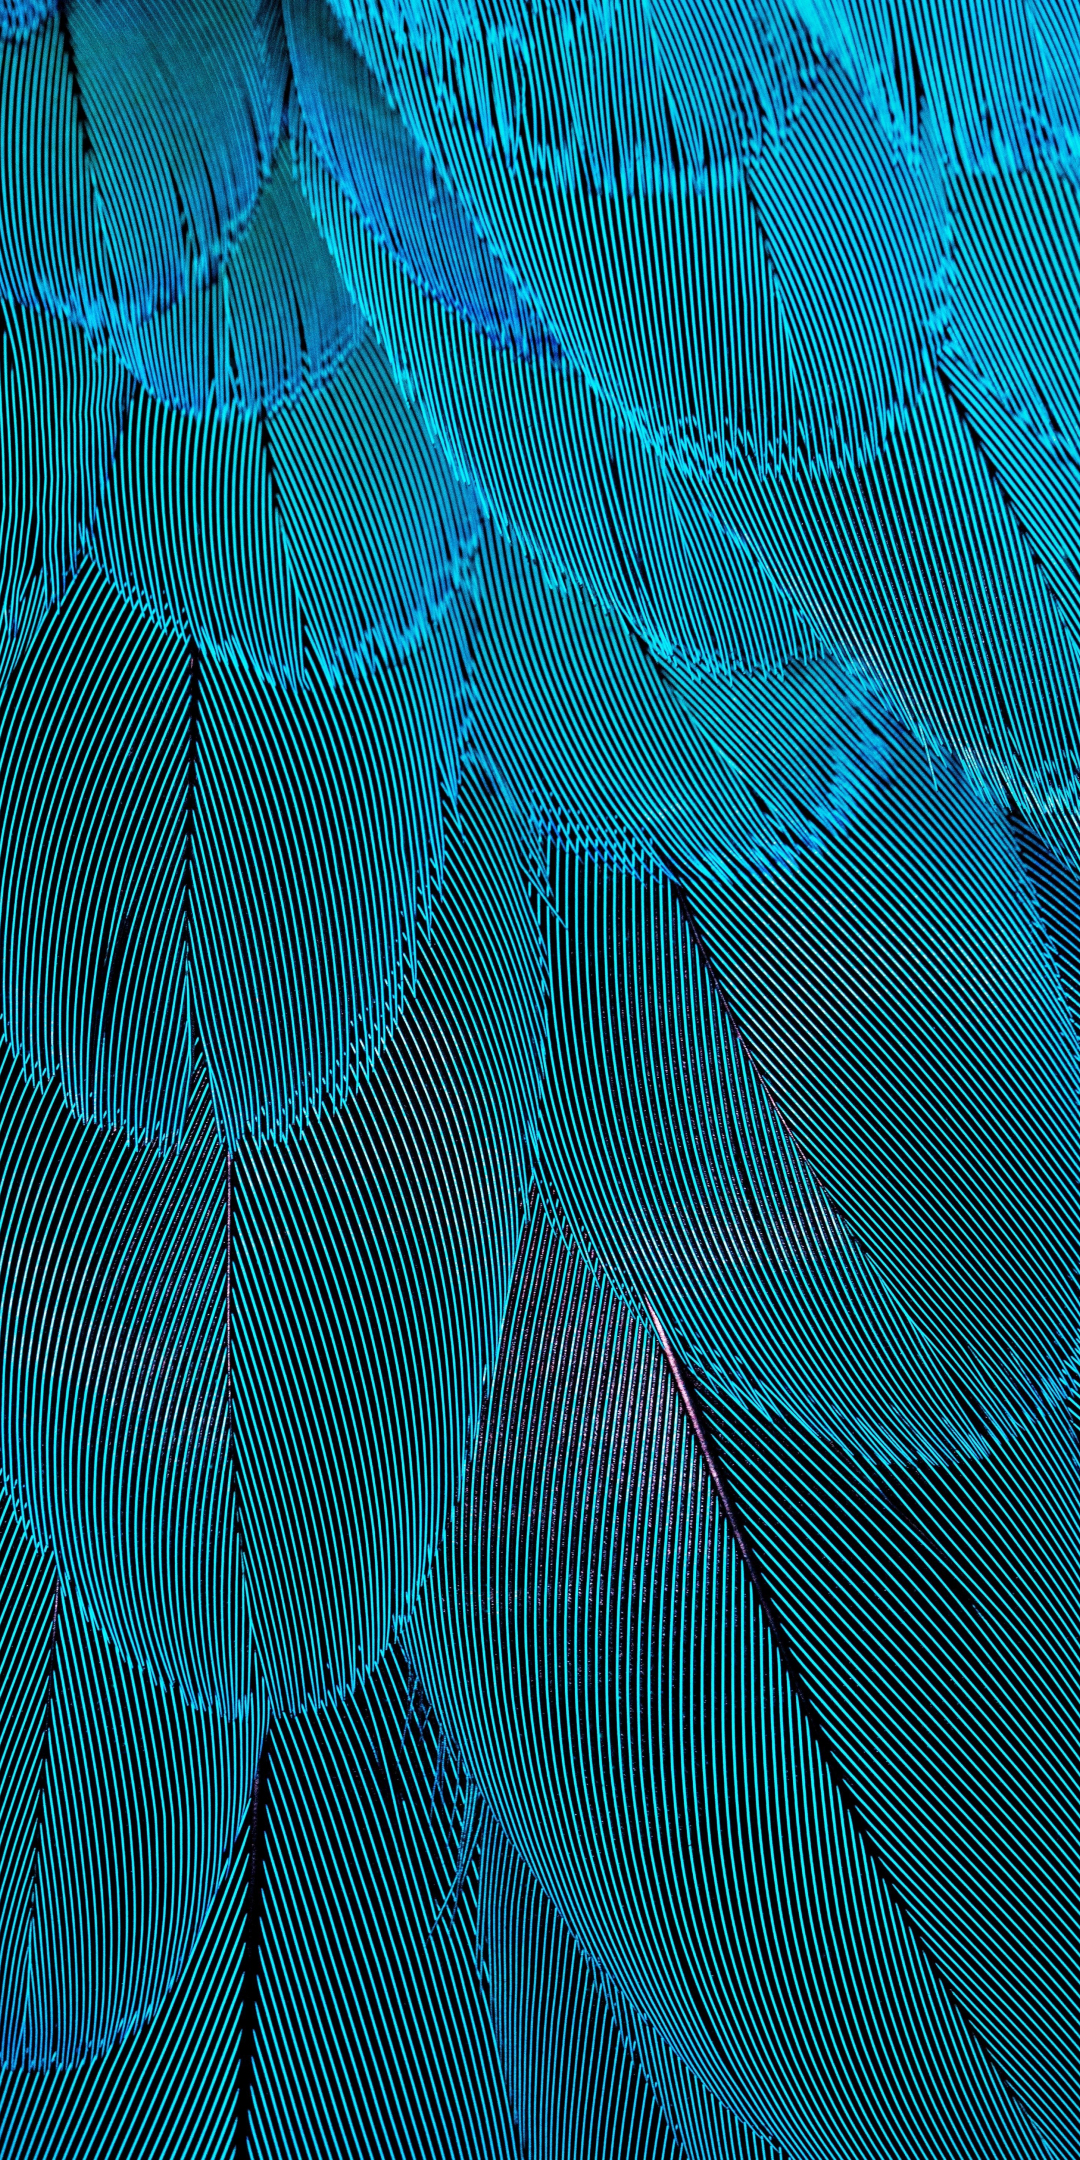 Plumage, blue feathers, close up, 1080x2160 wallpaper